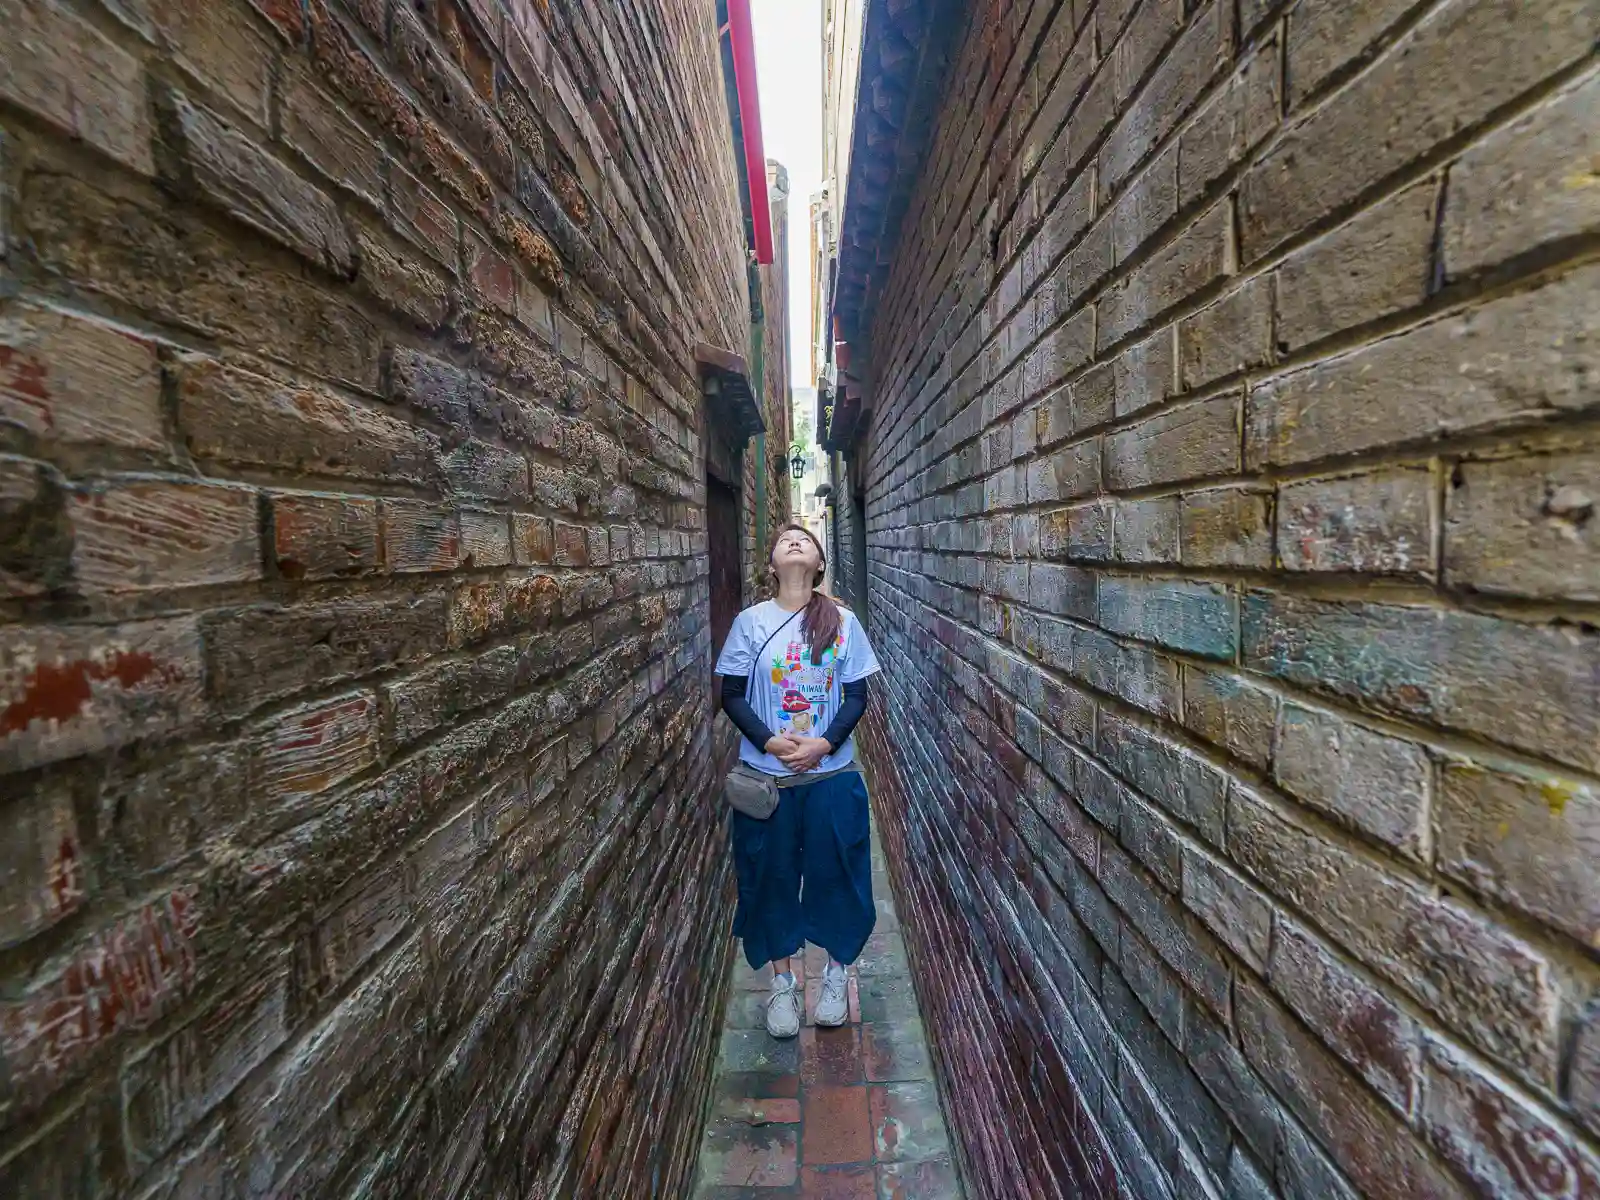 A tourist standing in Gentlemen Lane with her shoulders nearly touching the walls.